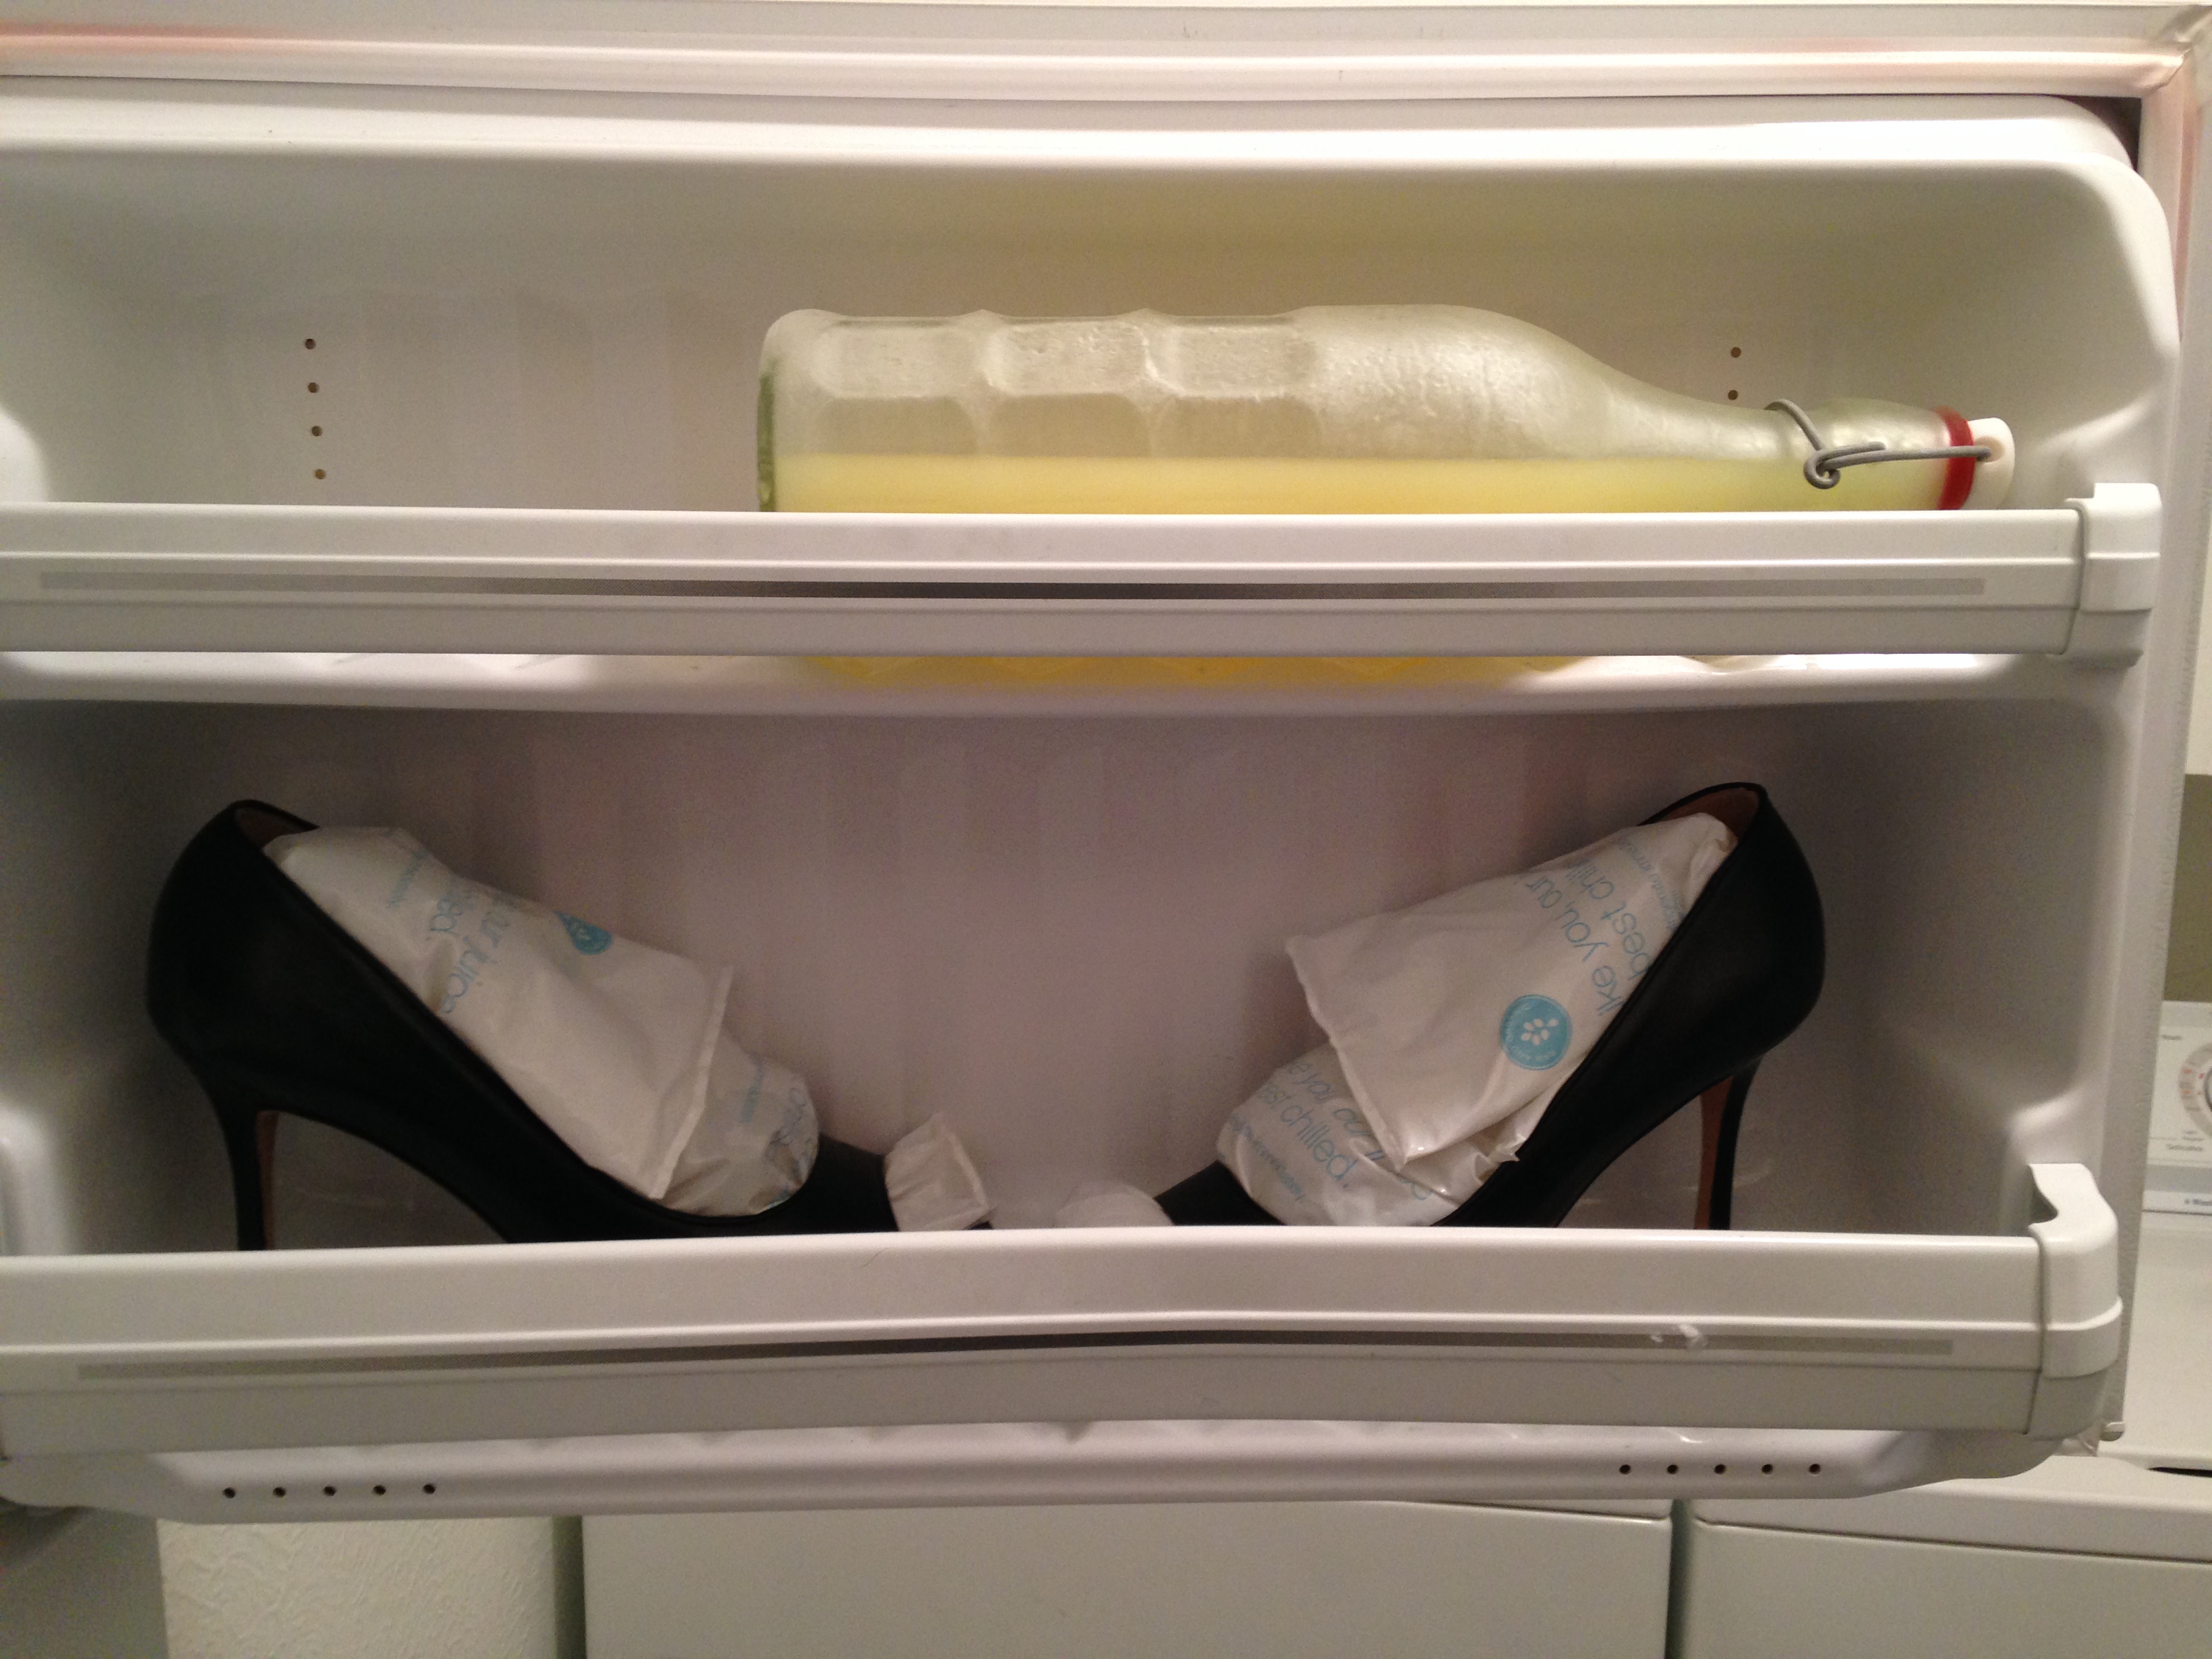 Stretching Tight Shoes in the Freezer